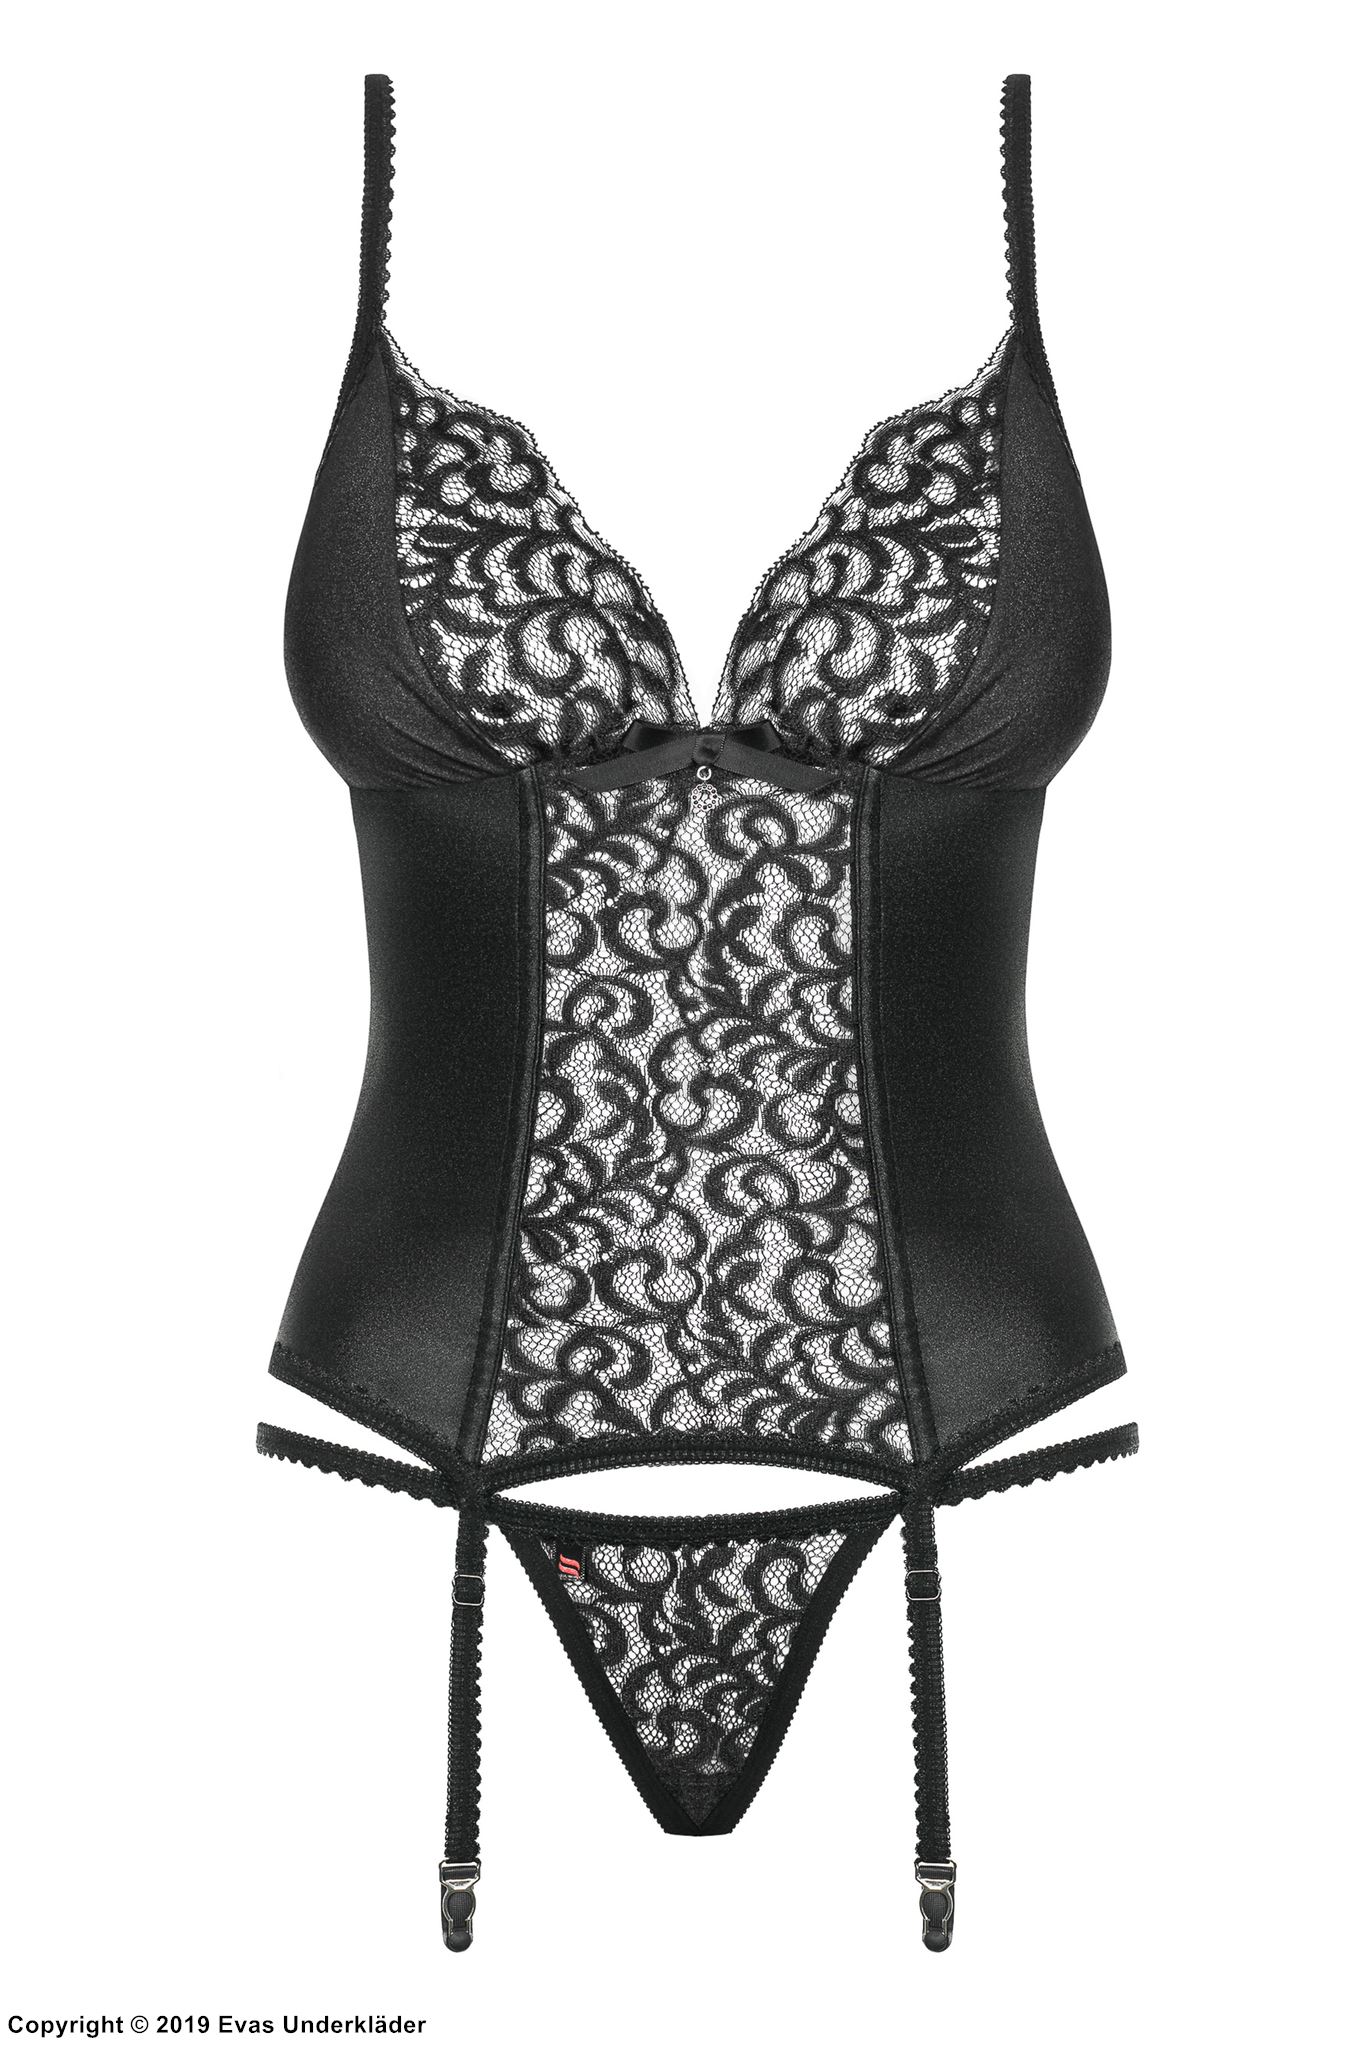 Romantic bustier, lace inlays